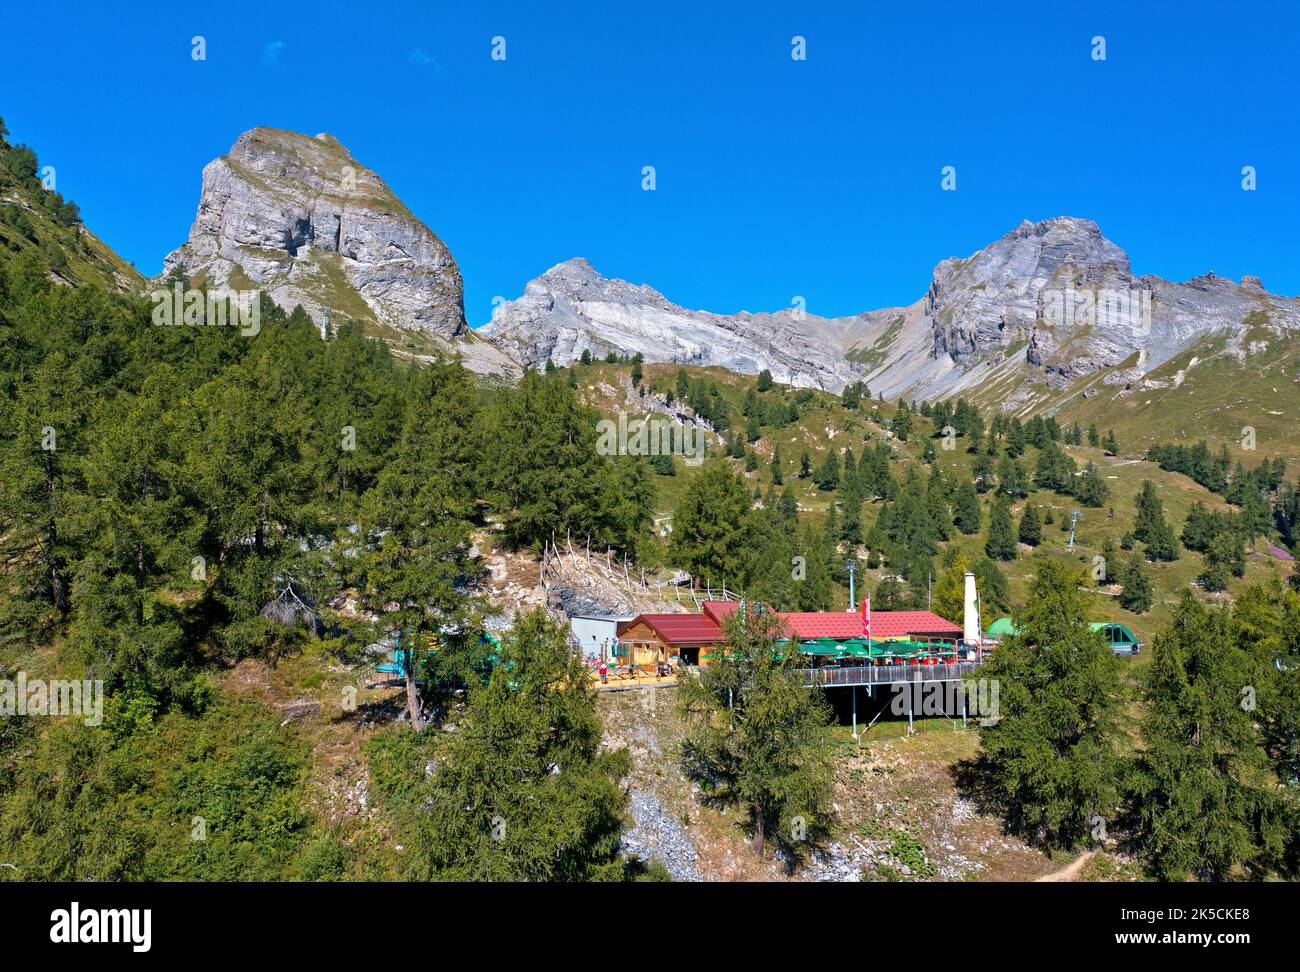 Mountain restaurant Jorasse in the larch forest, the peaks Six Armaille, Dent Favre and Pointe d'Aufalle of the Bernese Alps behind, Ovronnaz, Valais, Switzerland Stock Photo